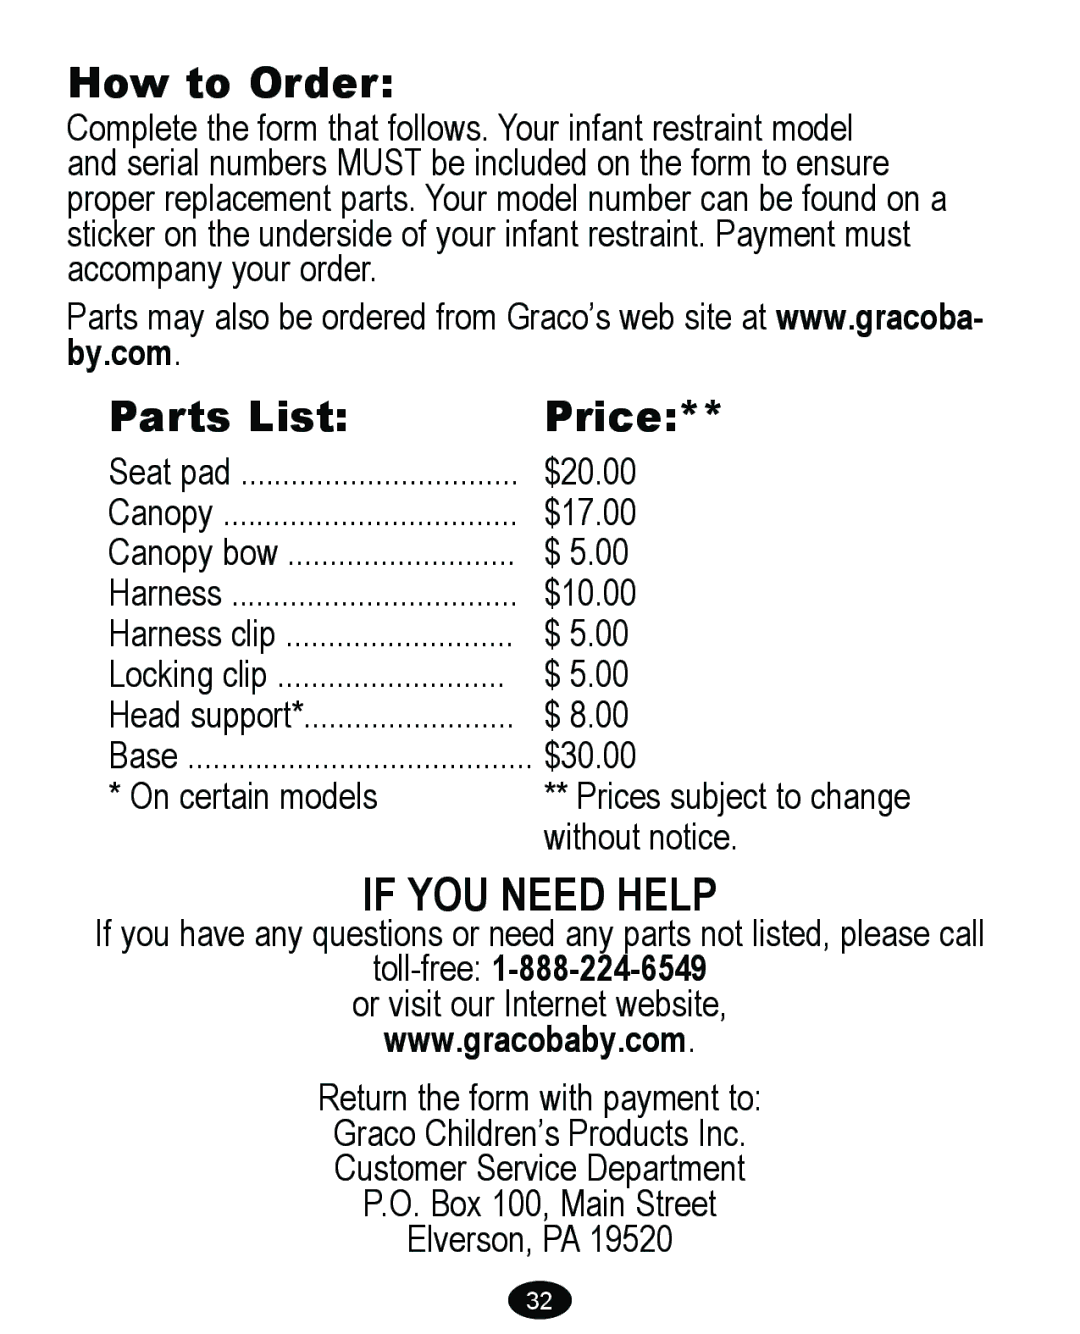 Graco 8474 owner manual How to Order, Parts List Price, Toll-free1-888-224-6549 